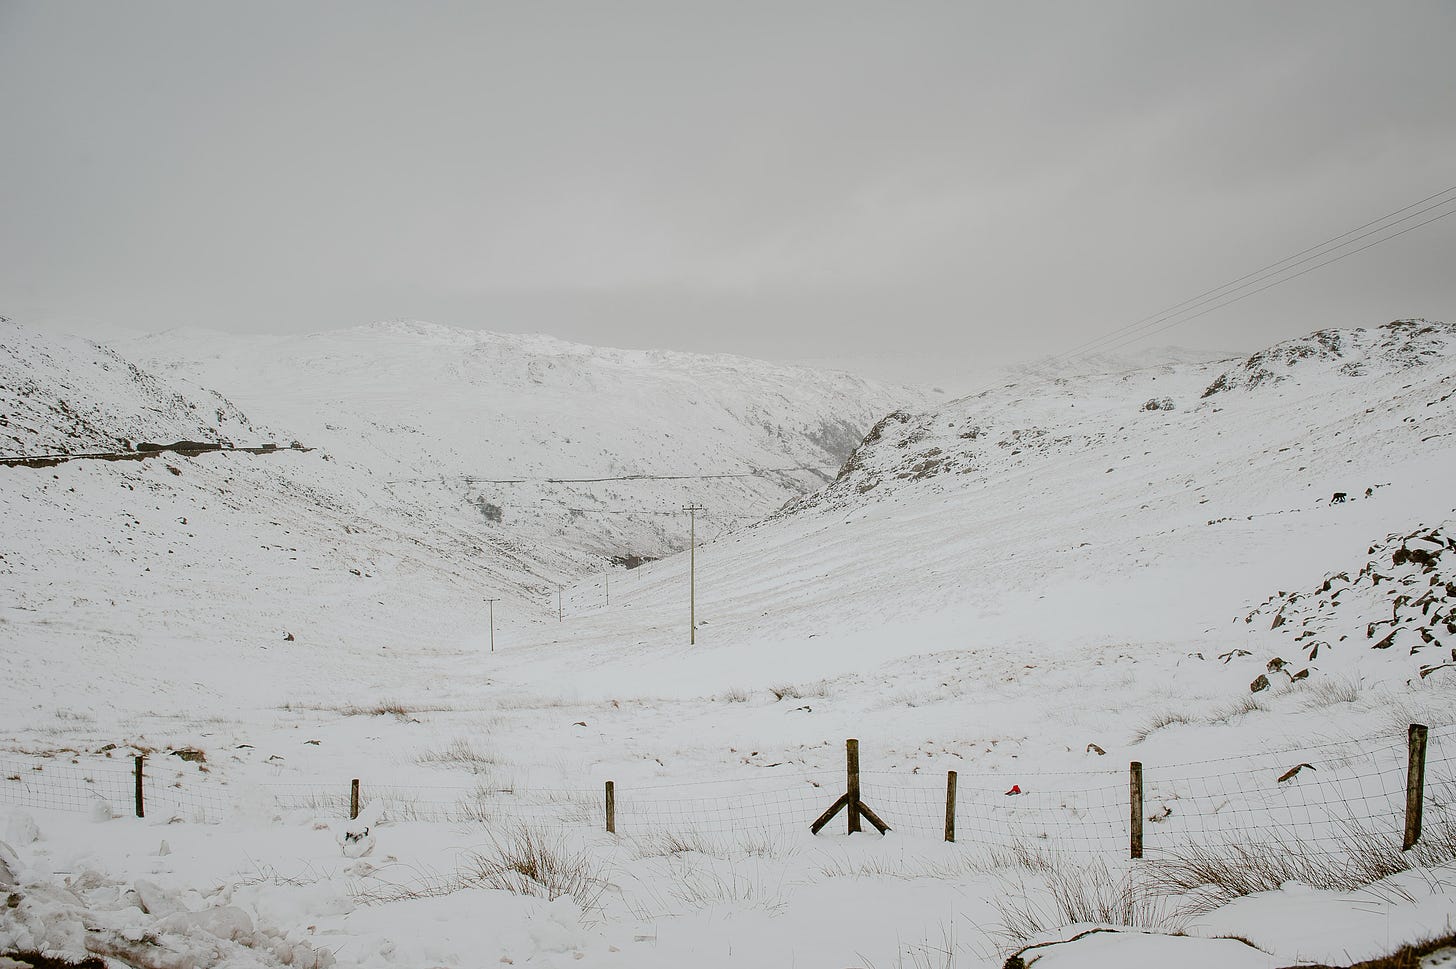 A snow covered landscape with telegraph poles running through the hills.